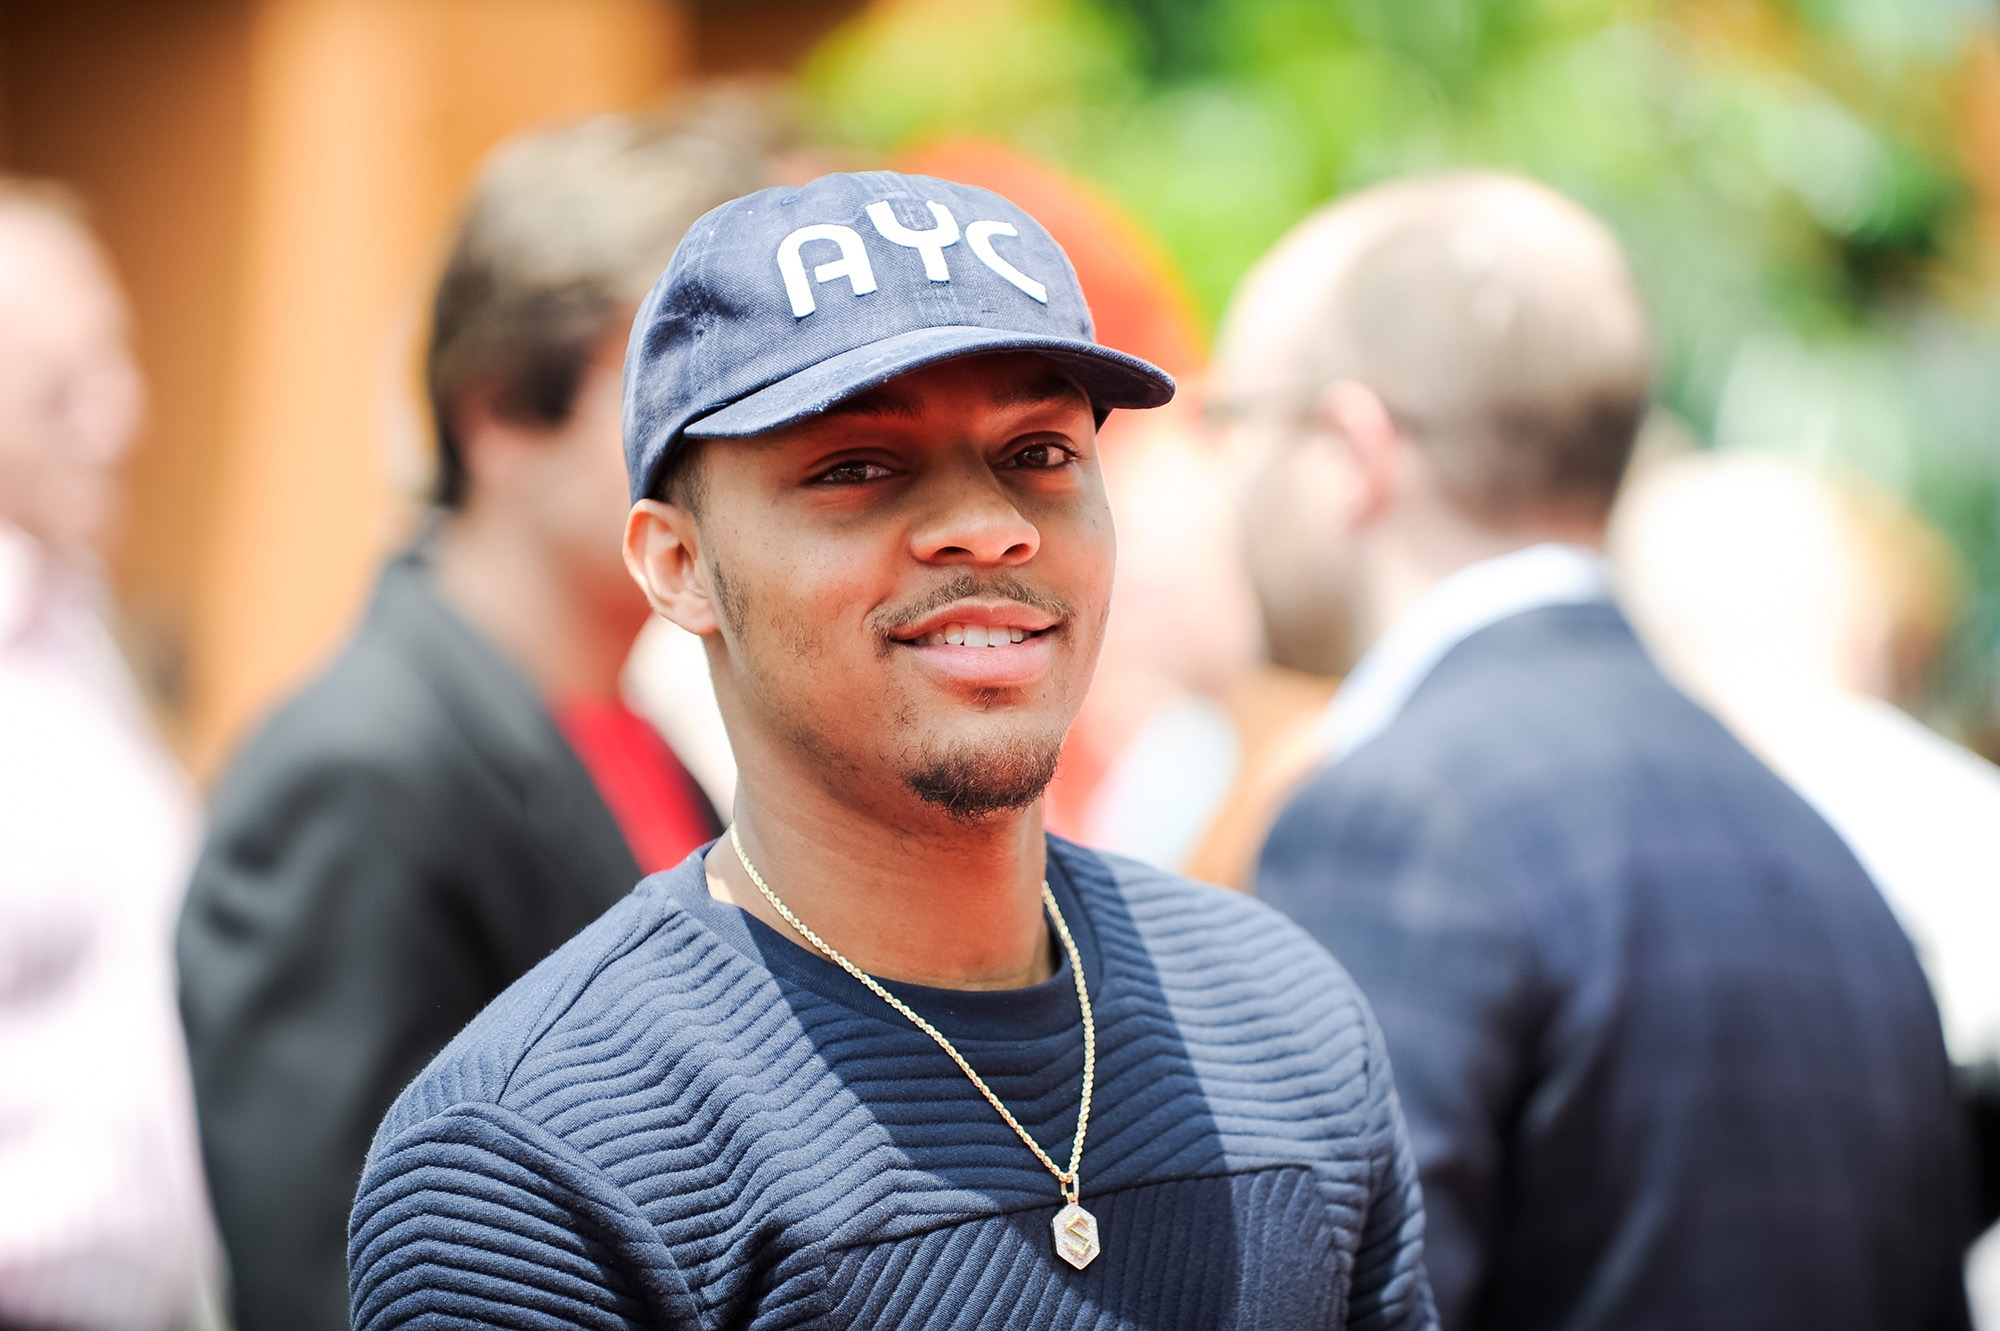 Bow Wow: Rapper Shad Moss Retires At The Age of 29